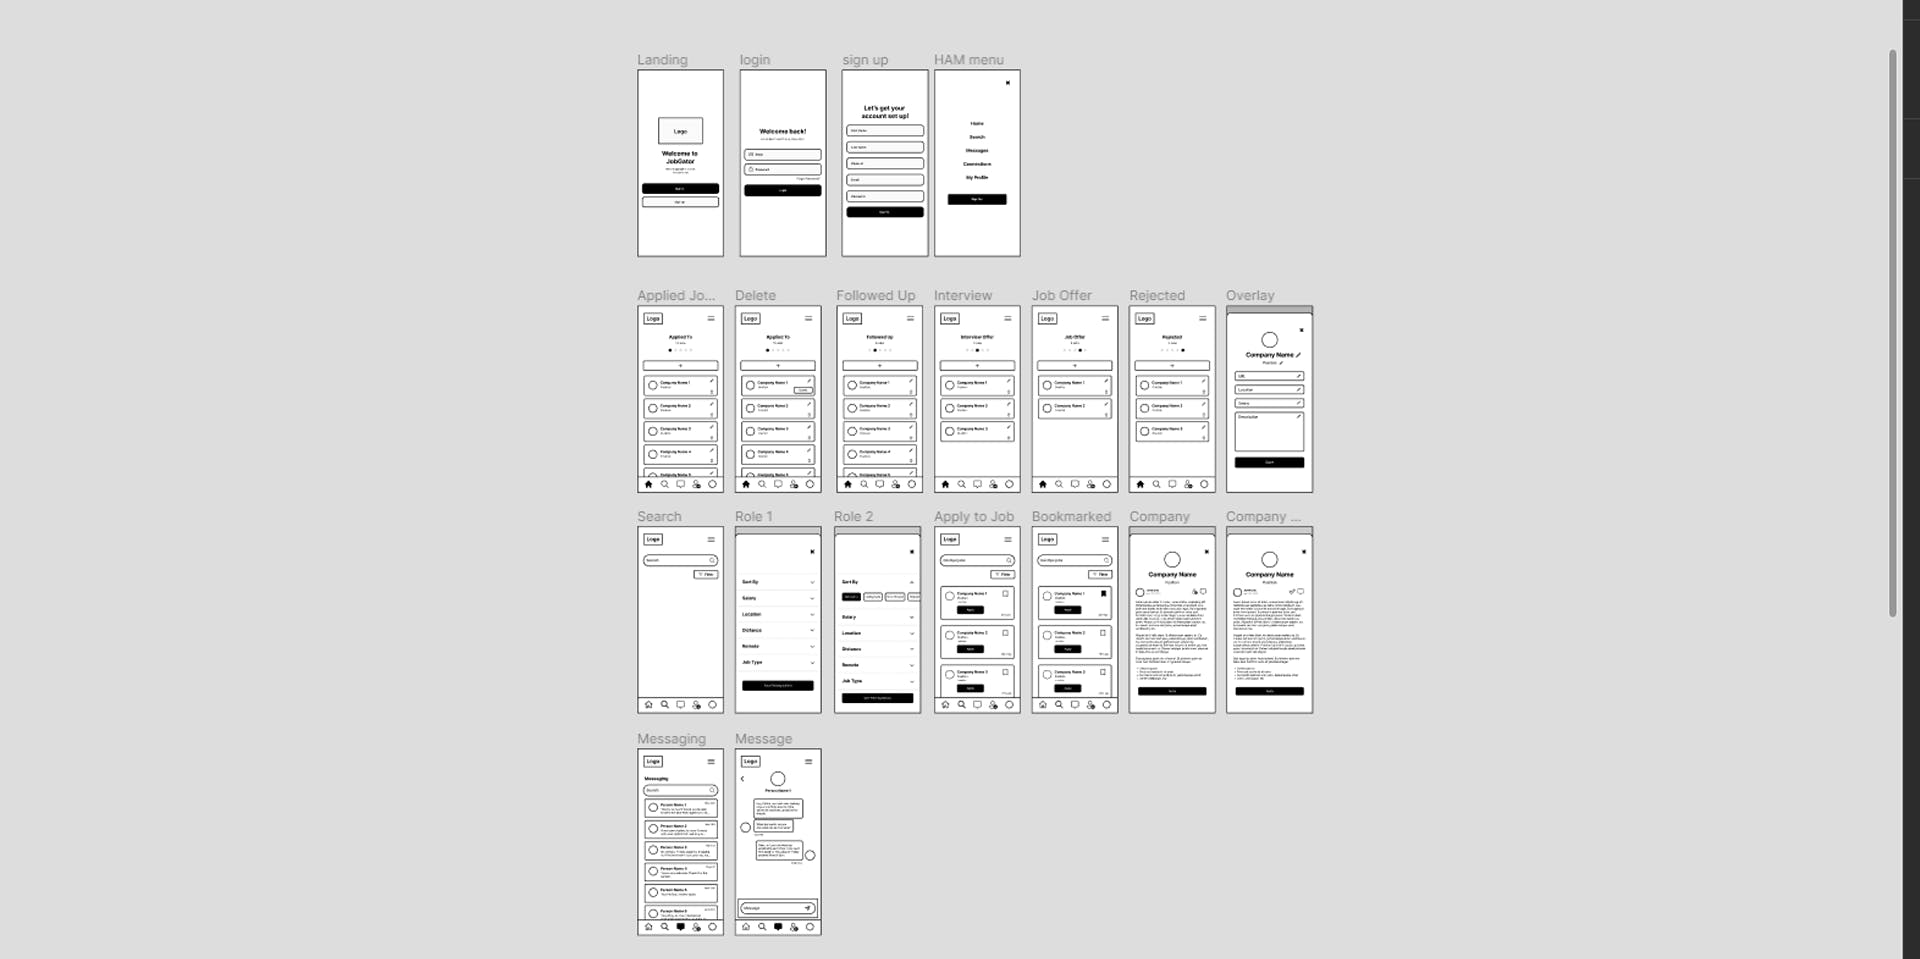 A series of low fidelity wireframes created for JobGator usability testing.